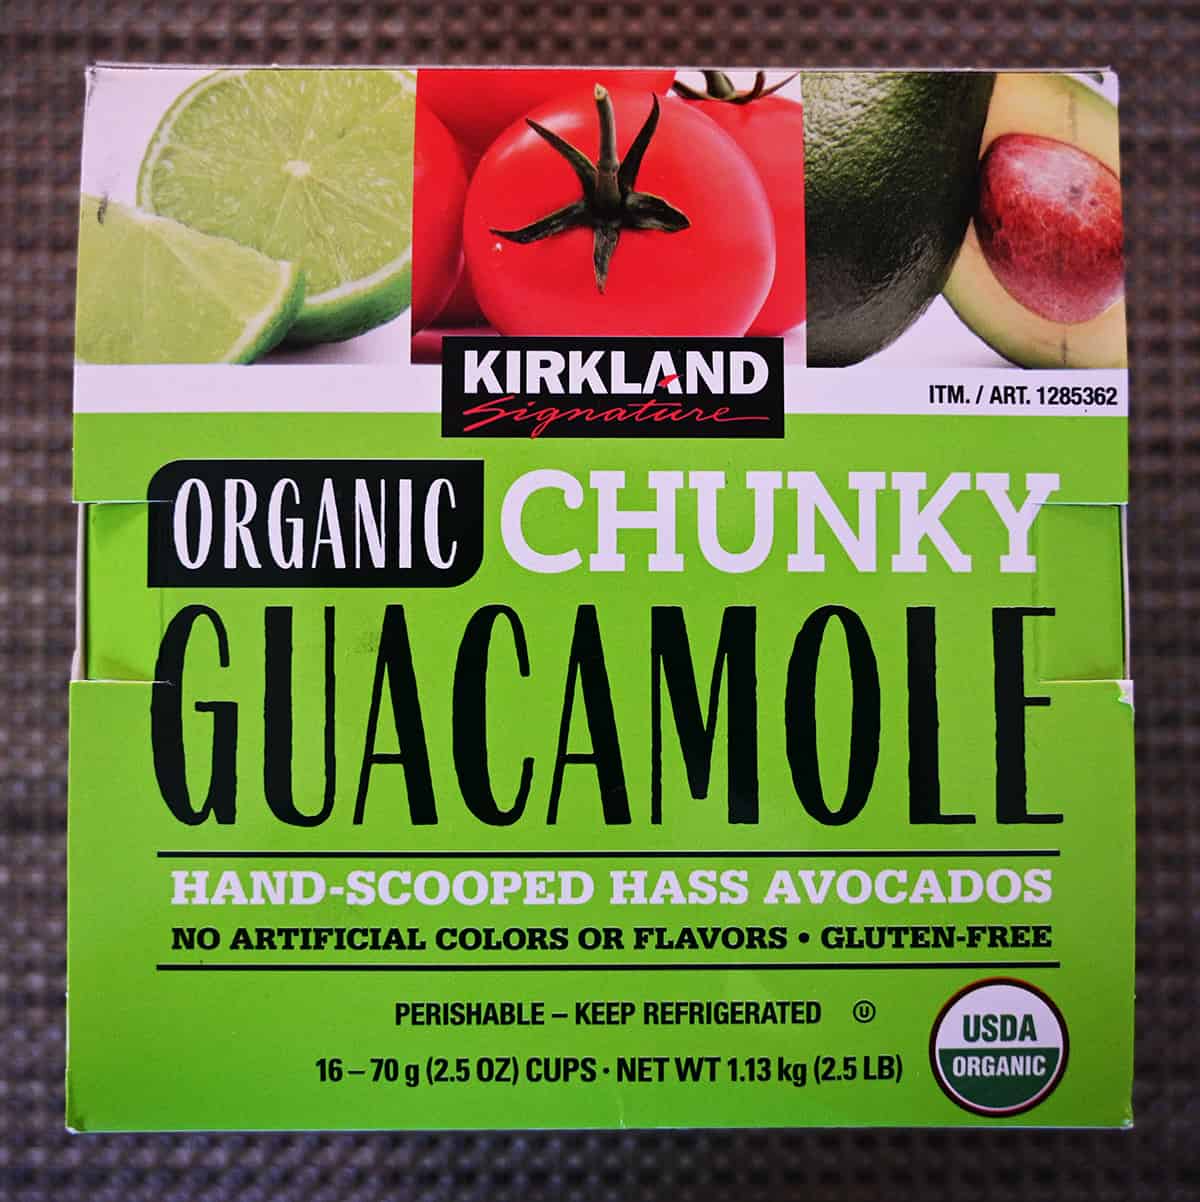 Closeup image of the front of the box of guacamole cops showing that there are no artificial flavors, colors and it's gluten-free.